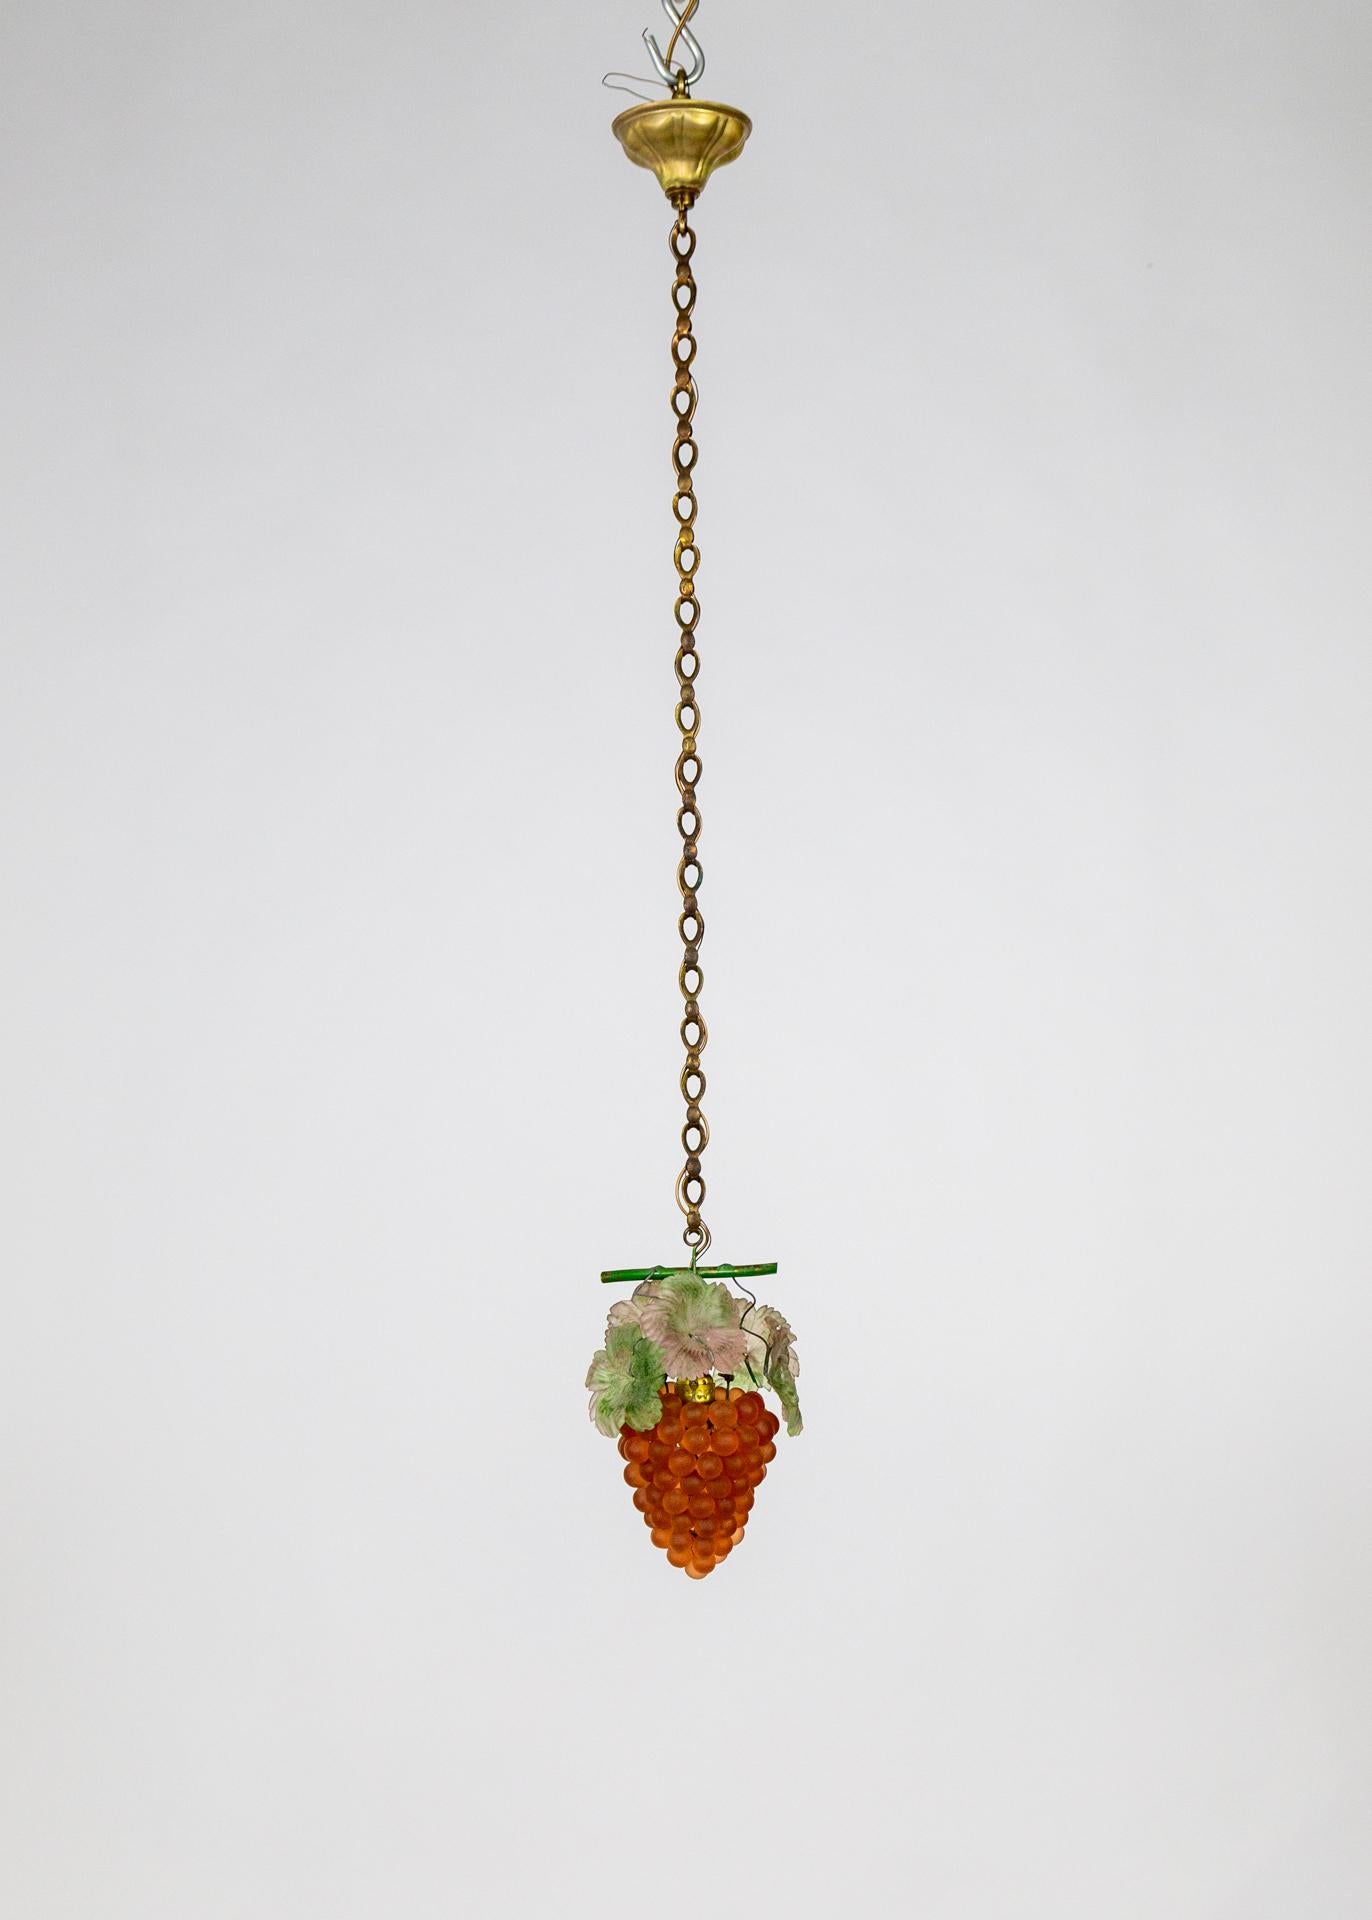 Hand-Crafted Italian Early 20th C. Glass Grape Bunch Pendant Light (3 available) For Sale